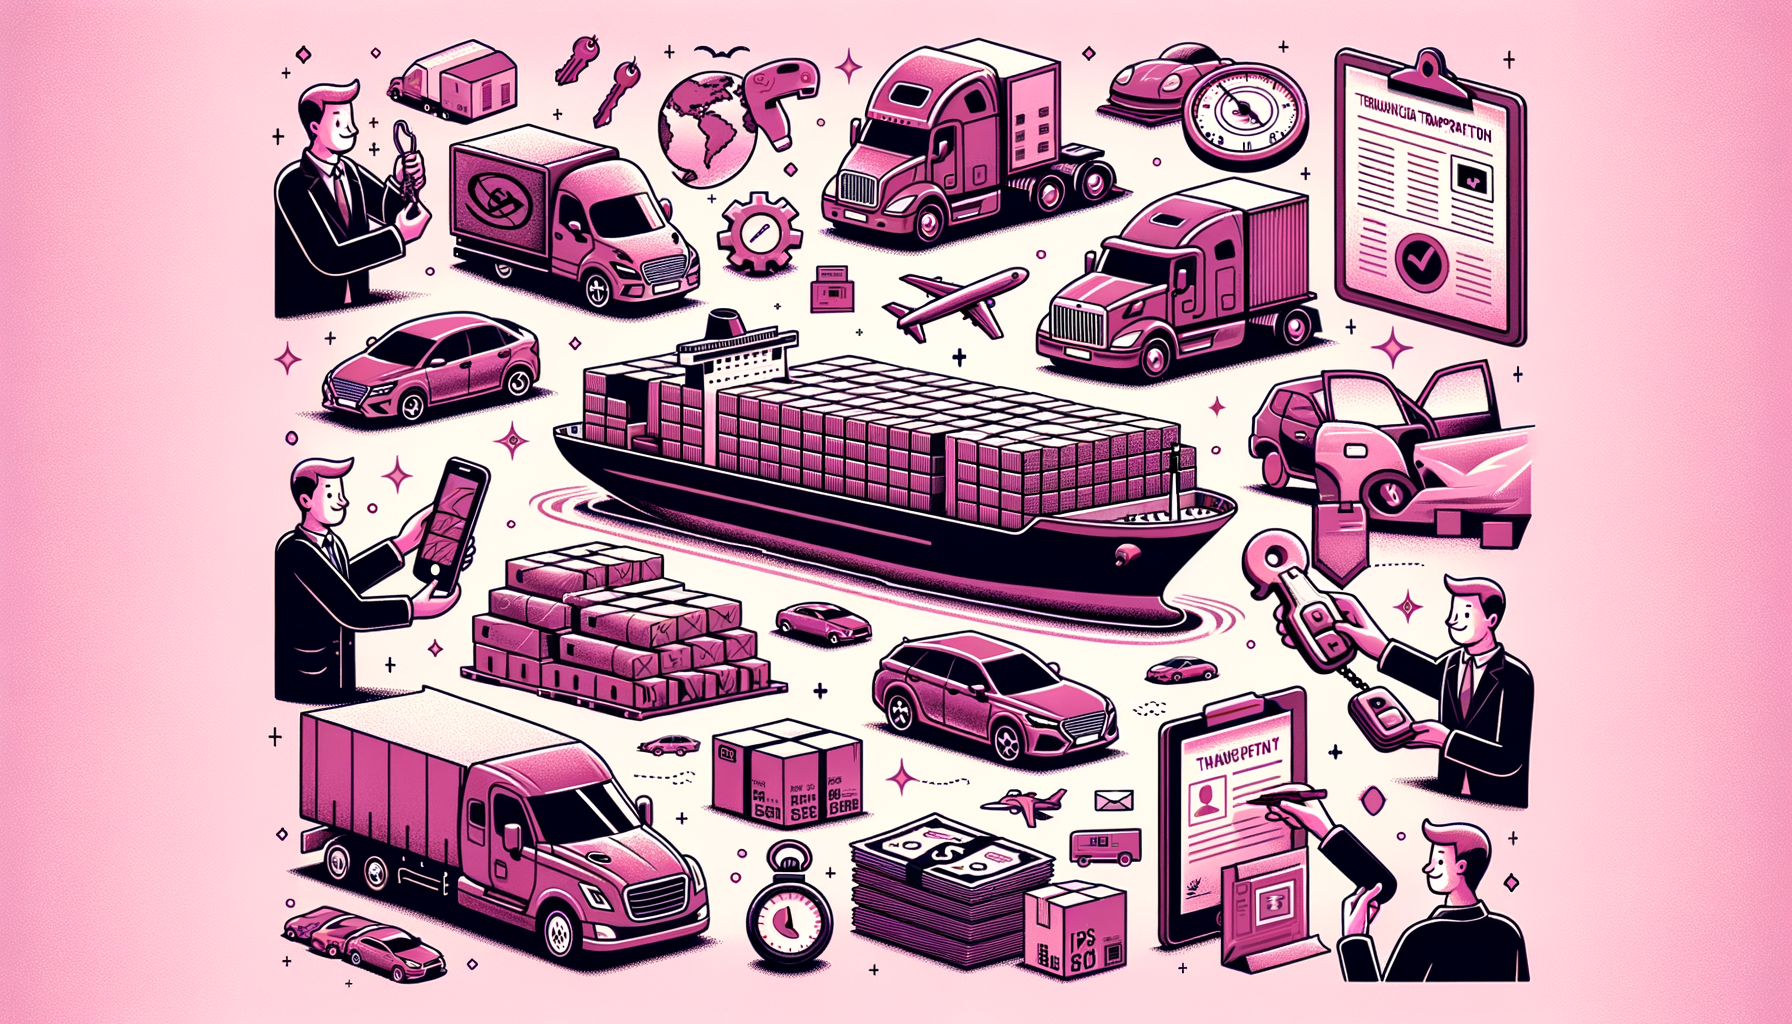 Cartoon-like fuschia colored image featuring various modes of vehicle transportation, highlighting cars, trucks, and trailers, symbolizing the fundamental aspects of vehicle transportation.